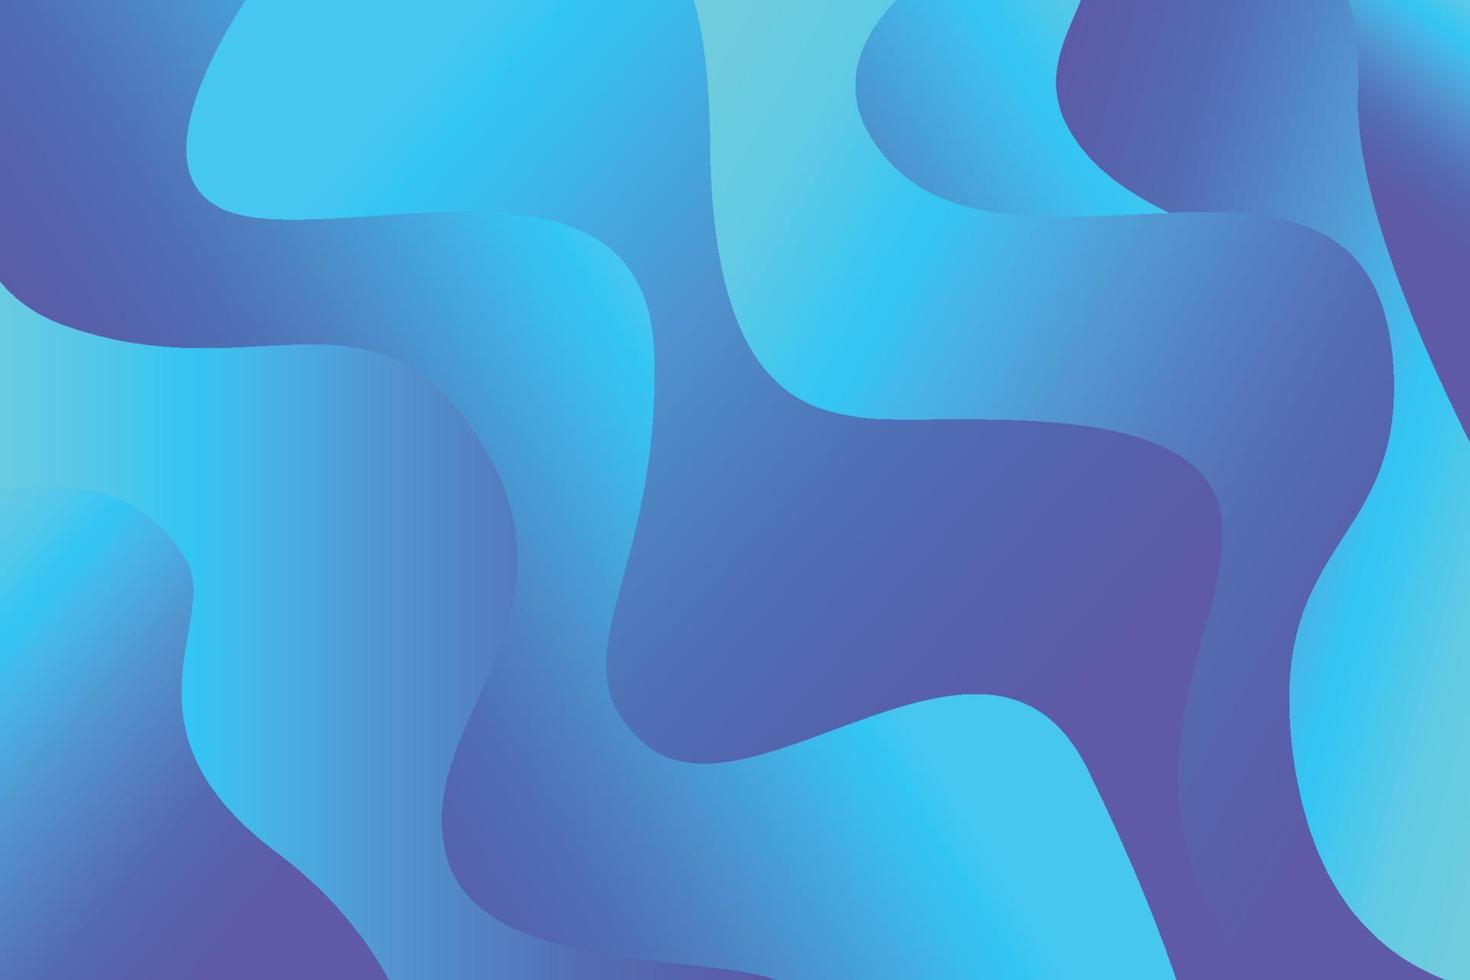 Abstract vivid blue and purple liquid gradient layered wavy shapes background vector